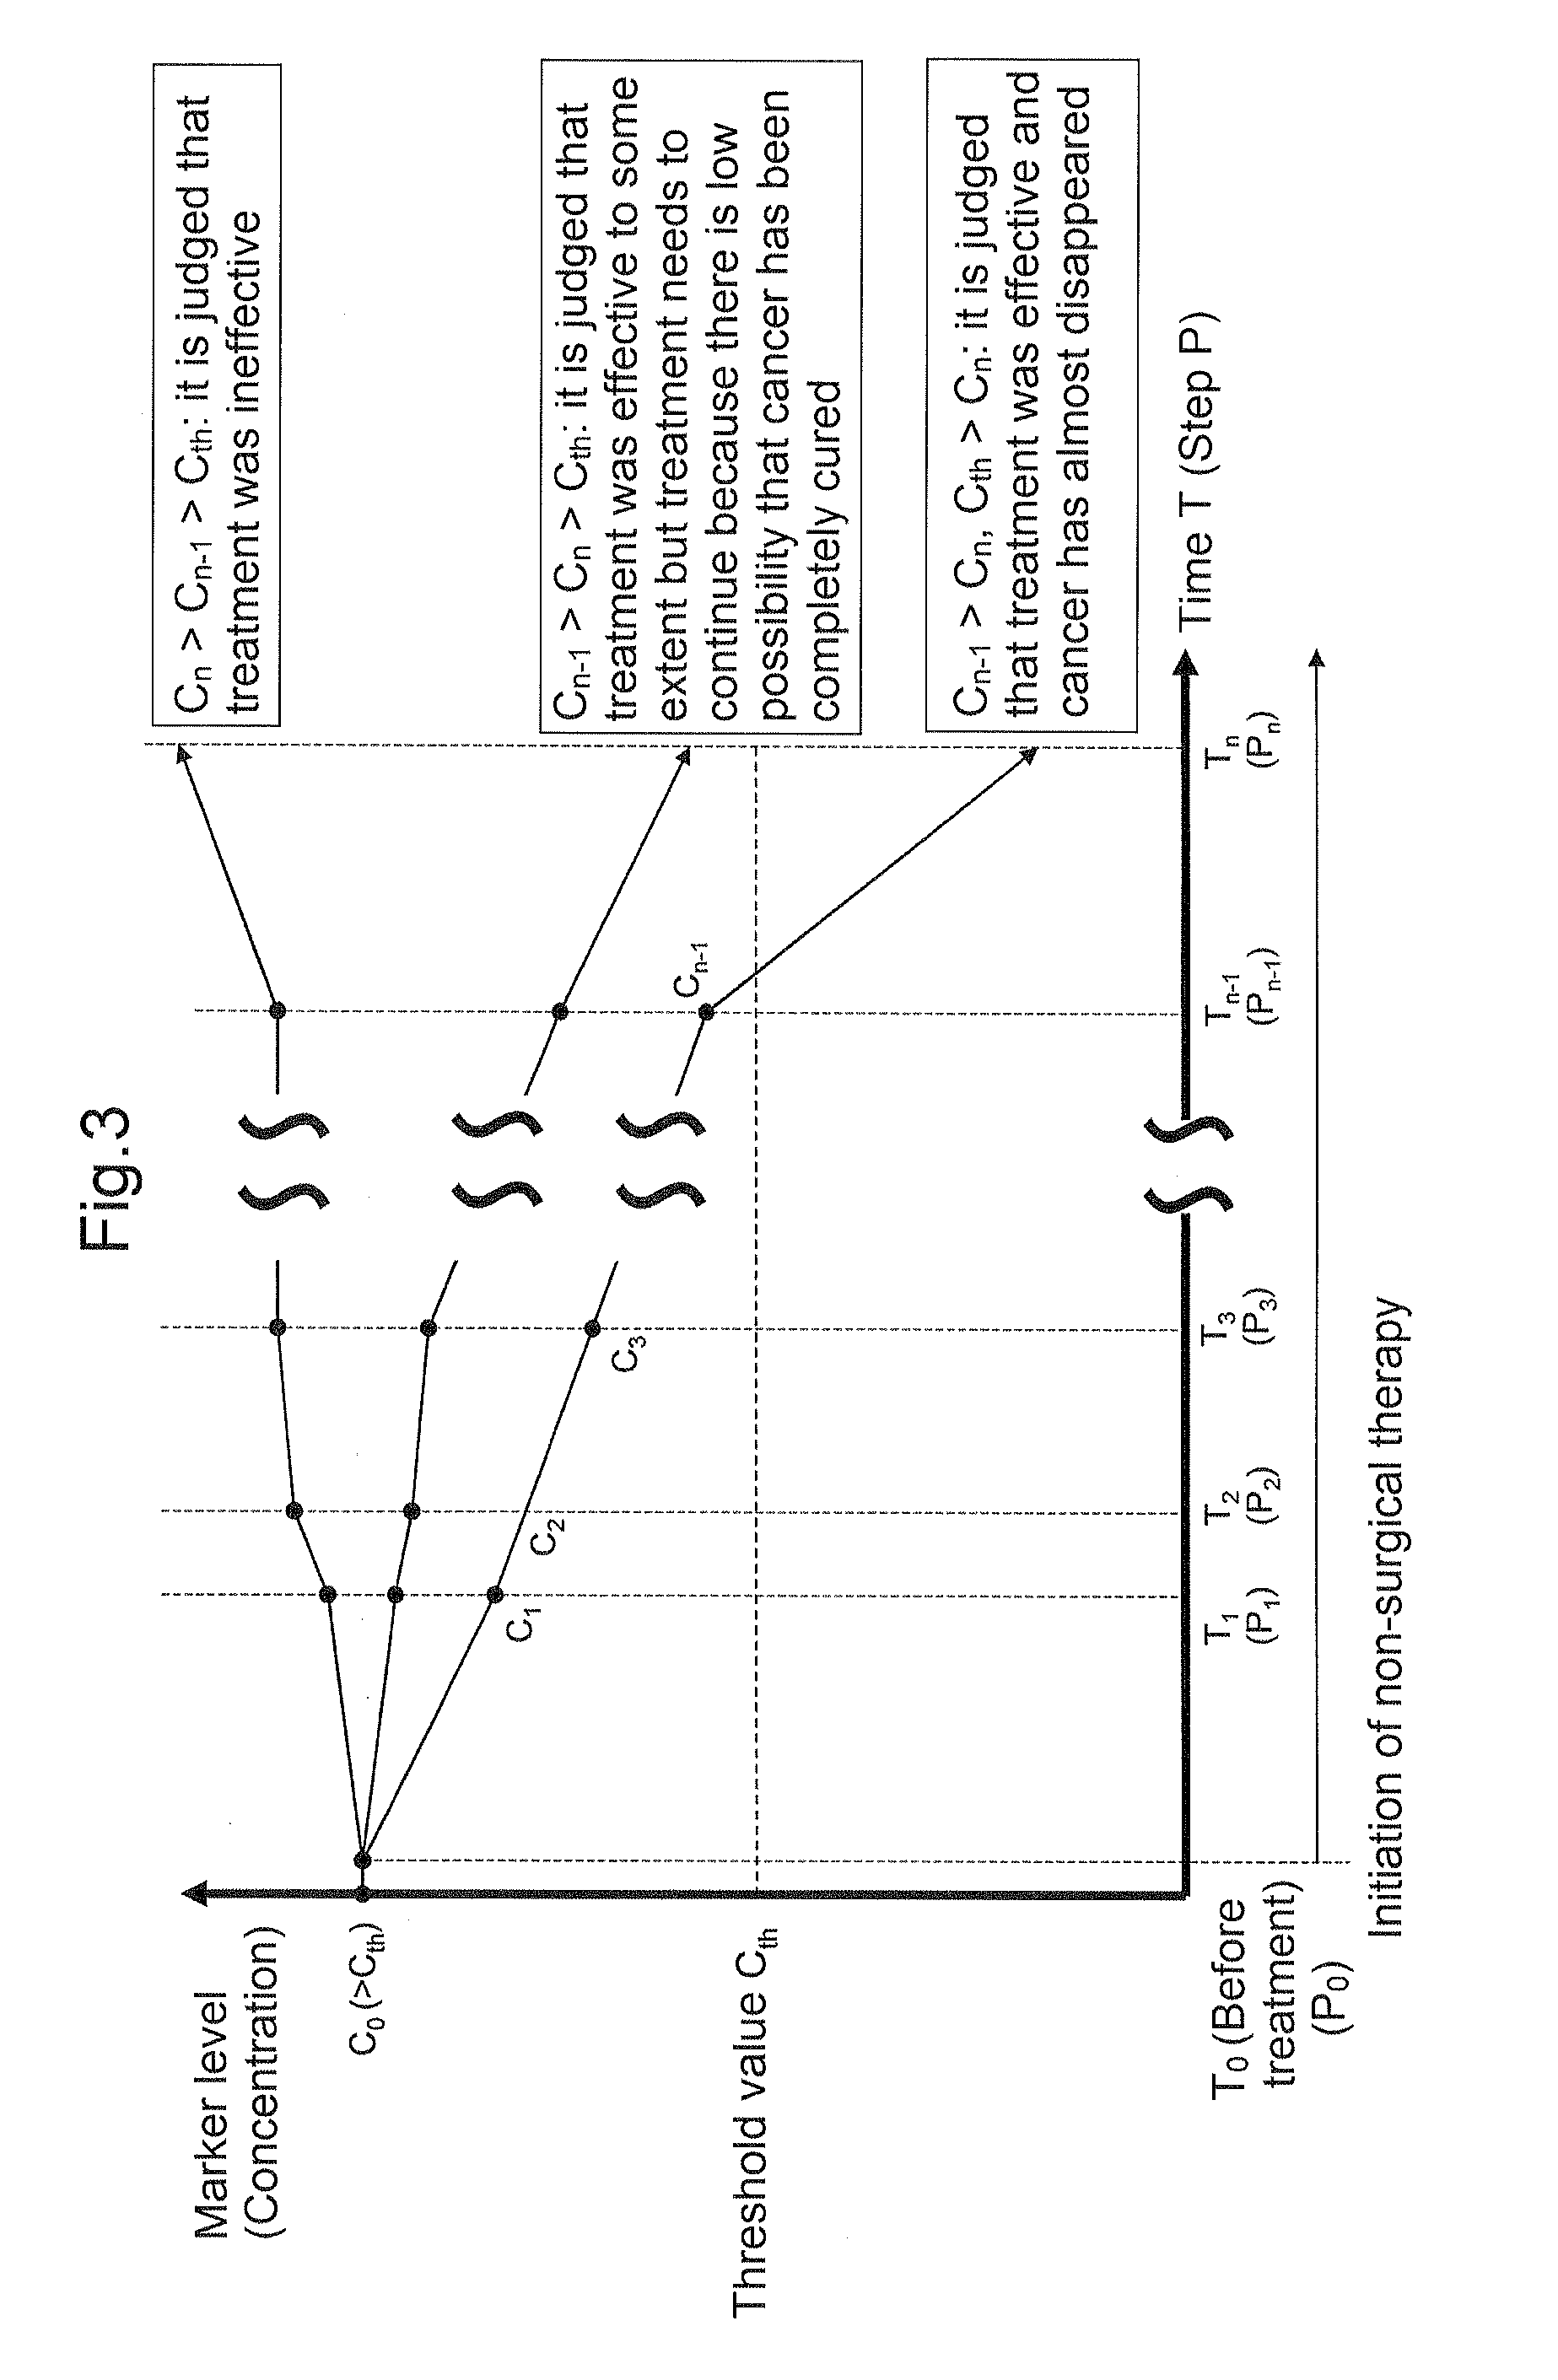 Colorectal cancer marker galectin, method for analyzing galectin concentration in blood sample, and kit for detecting colorectal cancer marker galectin